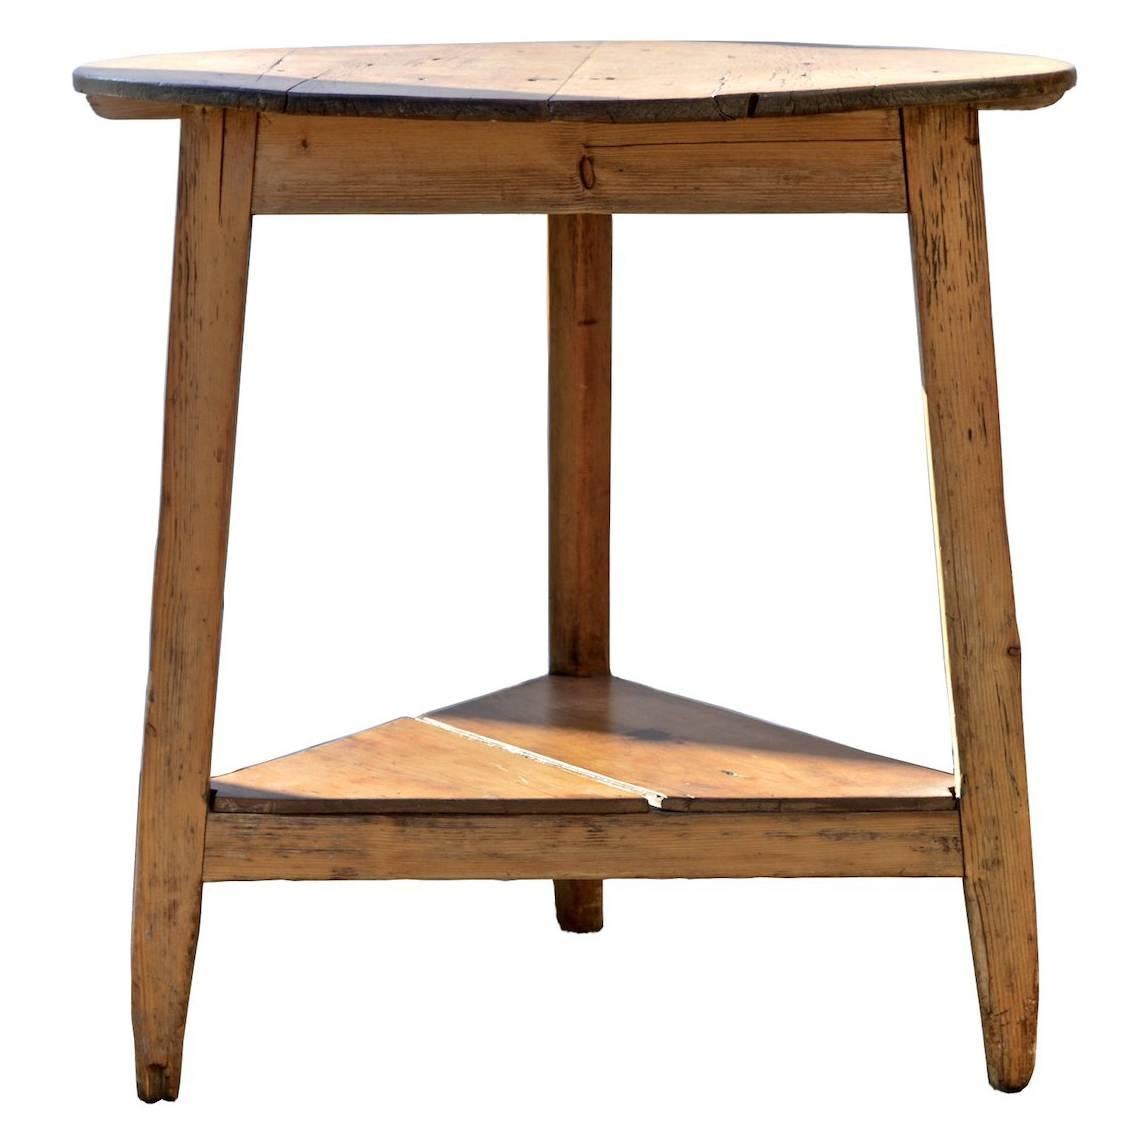 A fetching English cricket table of pine circa 1900 having a whitewashed finish. The ever useful and elegantly rustic side / end table can be successfully employed in such a wide range of interior spaces. It's a must have in every home. 